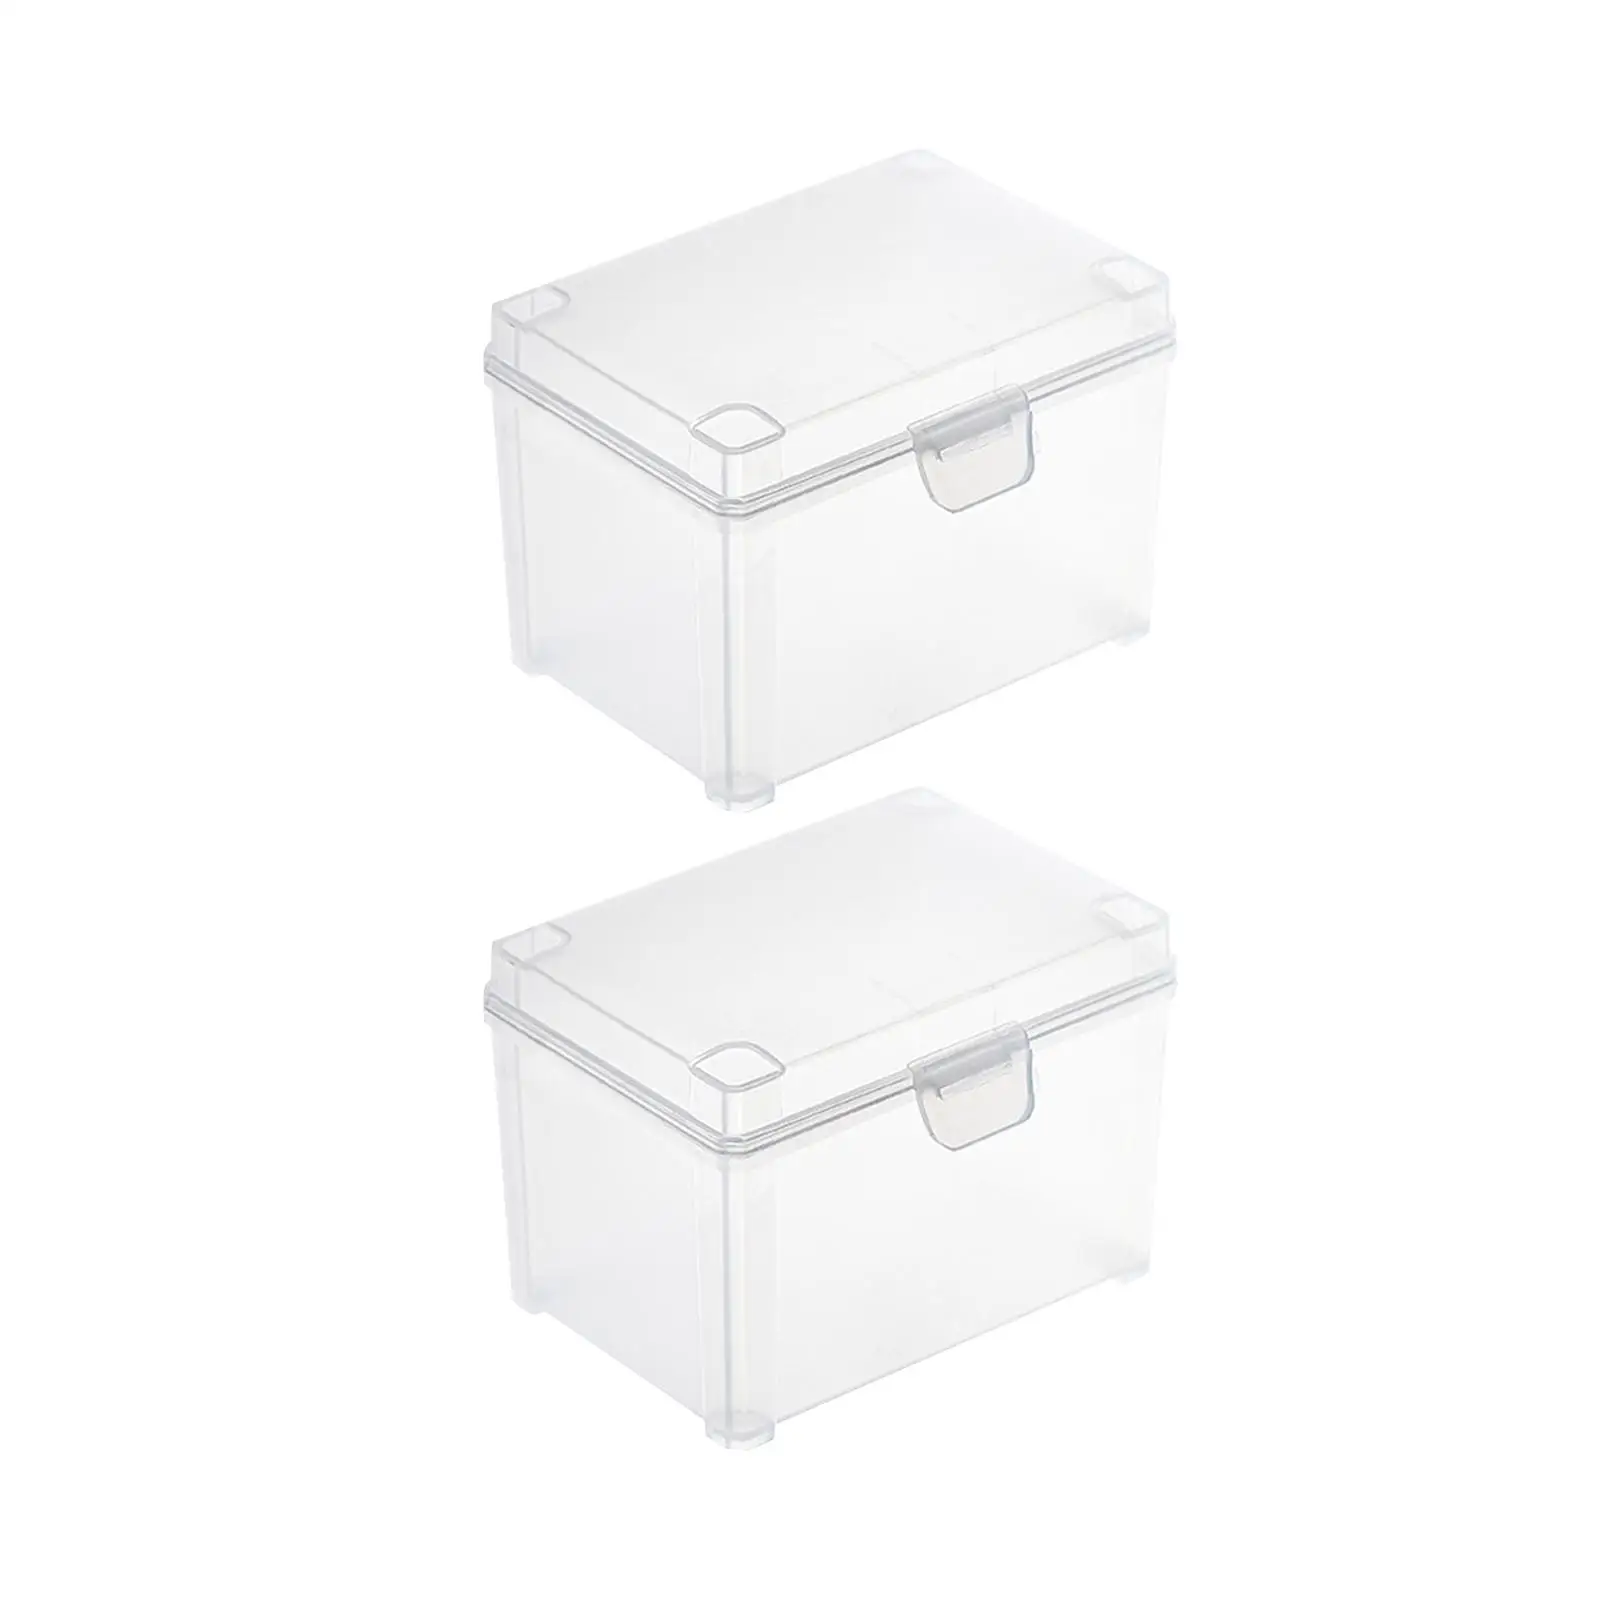 2x Small Stackable Boxes Container Rectangle Supplies Durable Saving Space Desktop Organizers for Clips Cards Jewelry Desk Home